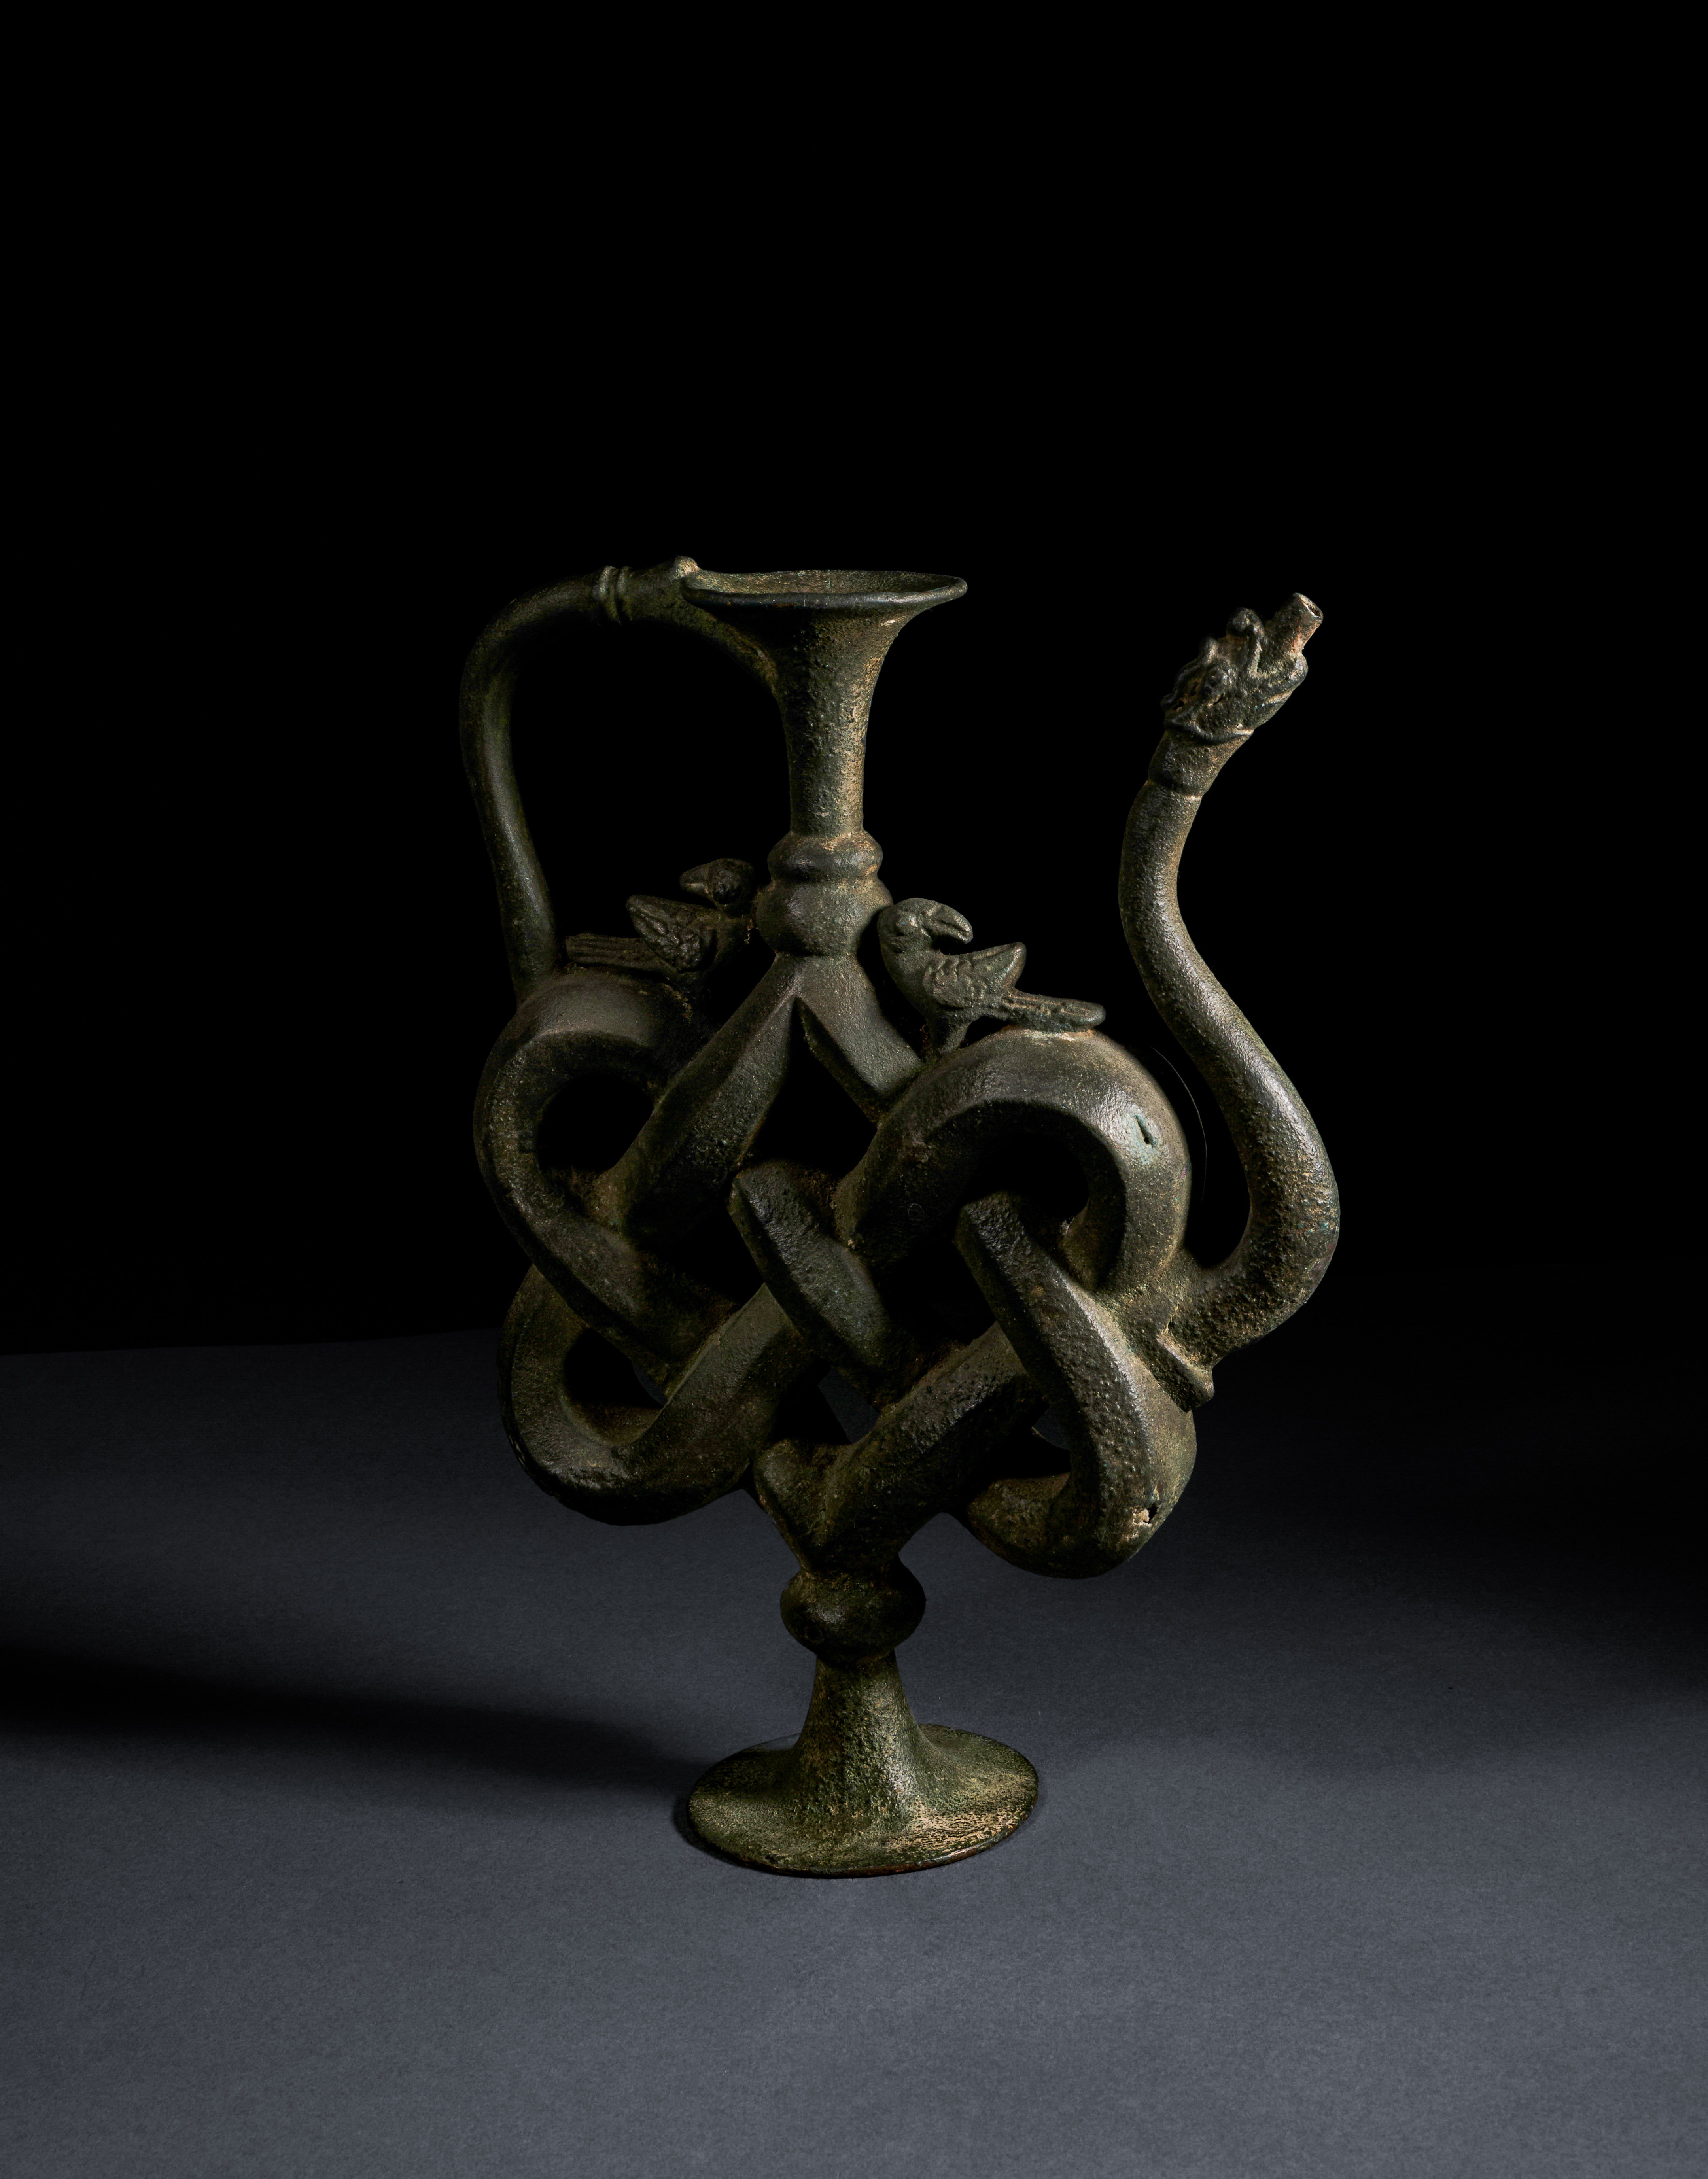 AN EXCEEDINGLY RARE BRONZE ANTHROPOMORPHIC EWER, DECCAN, CENTRAL INDIA, 16TH OR EARLY 17TH CENTURY - Image 3 of 4